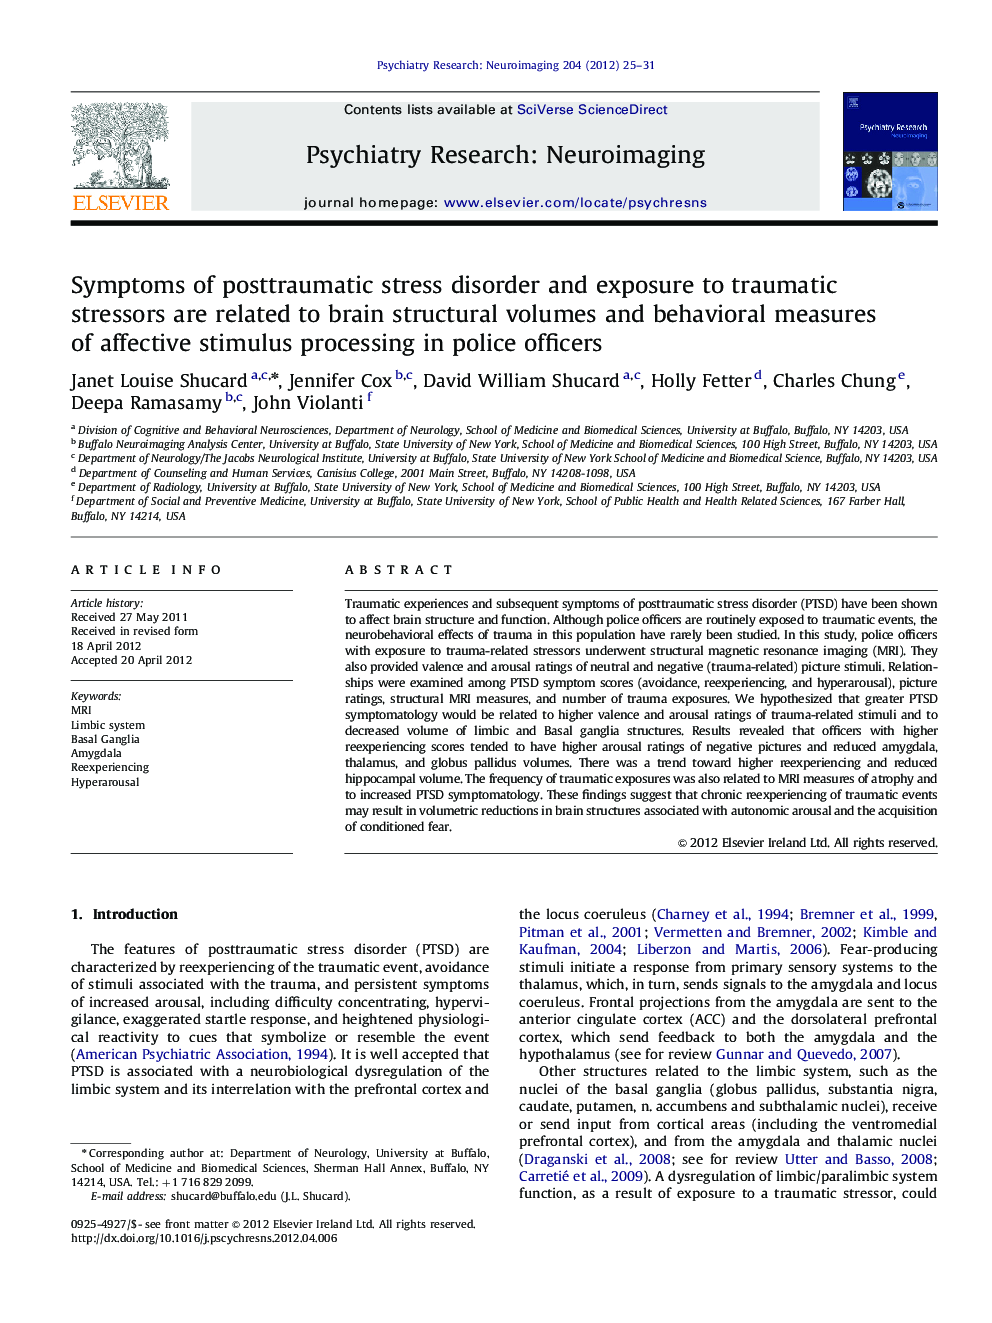 Symptoms of posttraumatic stress disorder and exposure to traumatic stressors are related to brain structural volumes and behavioral measures of affective stimulus processing in police officers